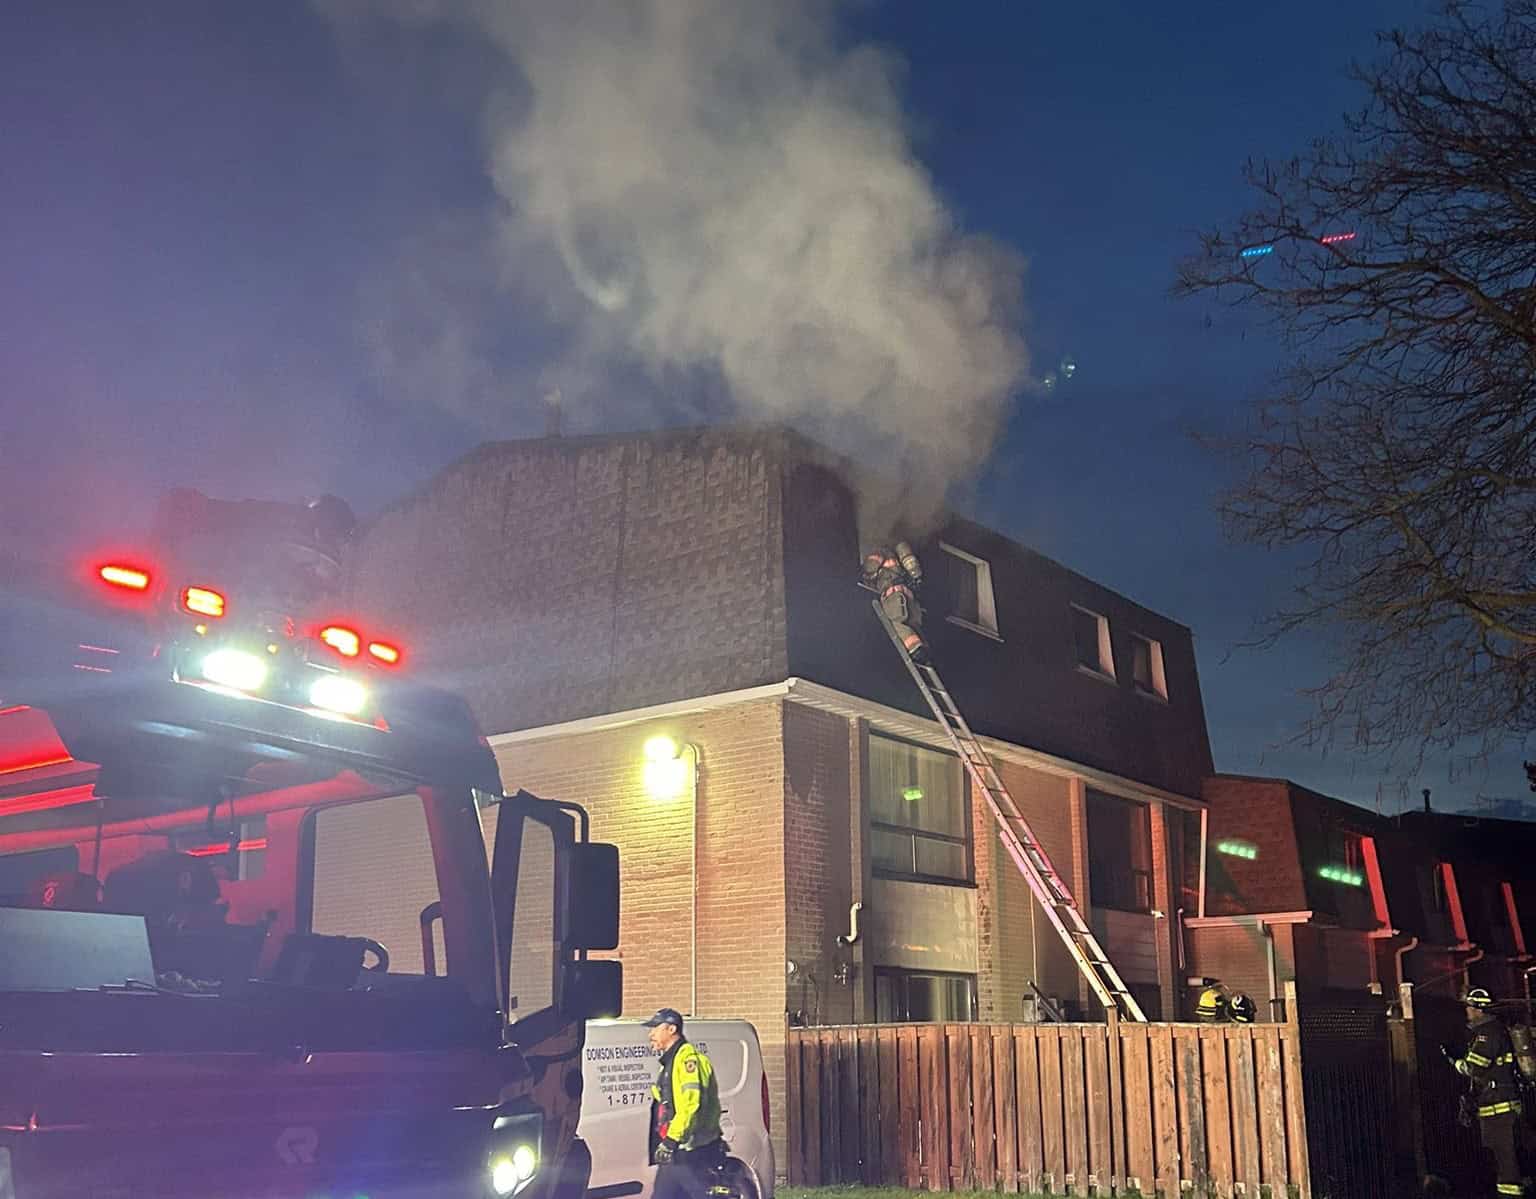 House fire broke out in Brampton early this morning with one person in hospital